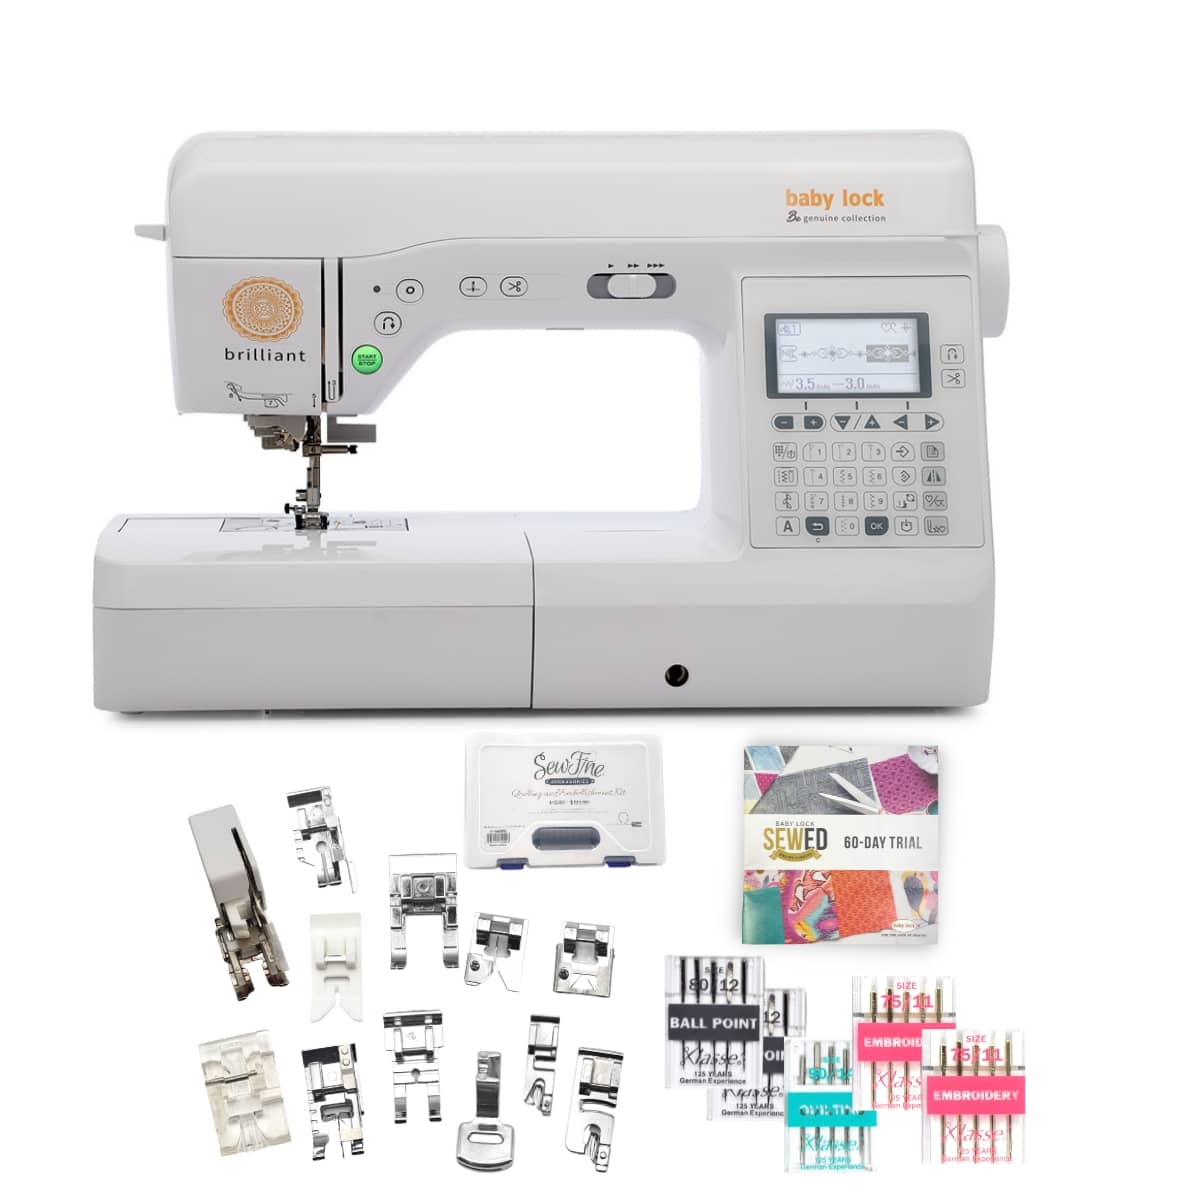 Sewing Machine, Needle Threader, Sew, Colors, Needle, Threader, Bling,  Cross Stitch, Embroidery, Needle Point, Stitching, Stitch, Sewing 